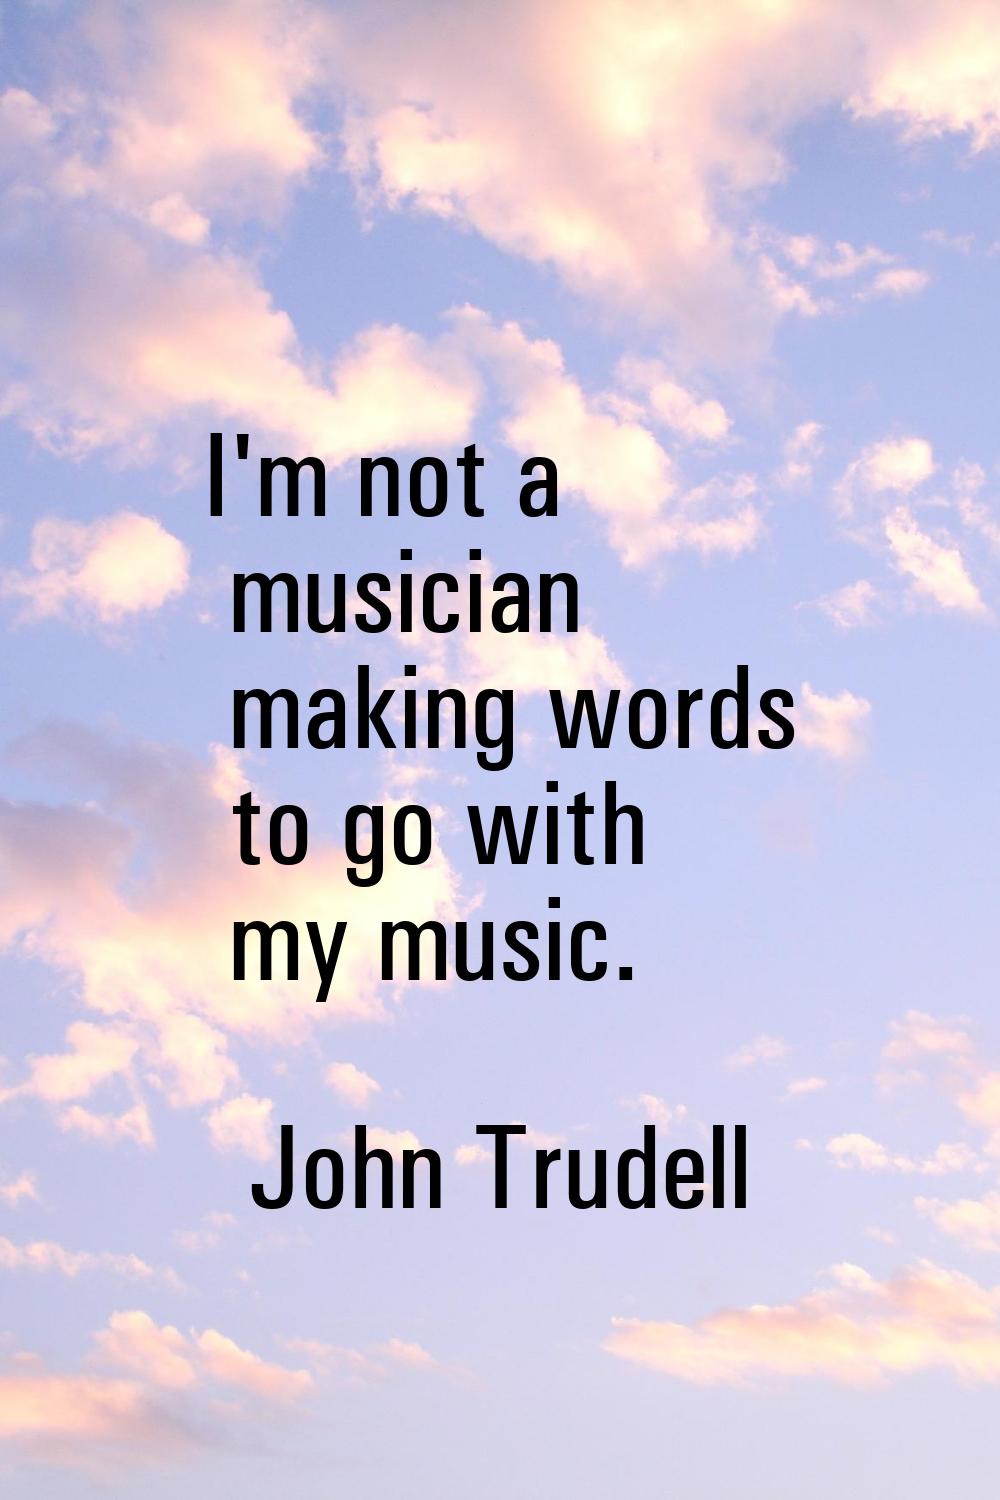 I'm not a musician making words to go with my music.